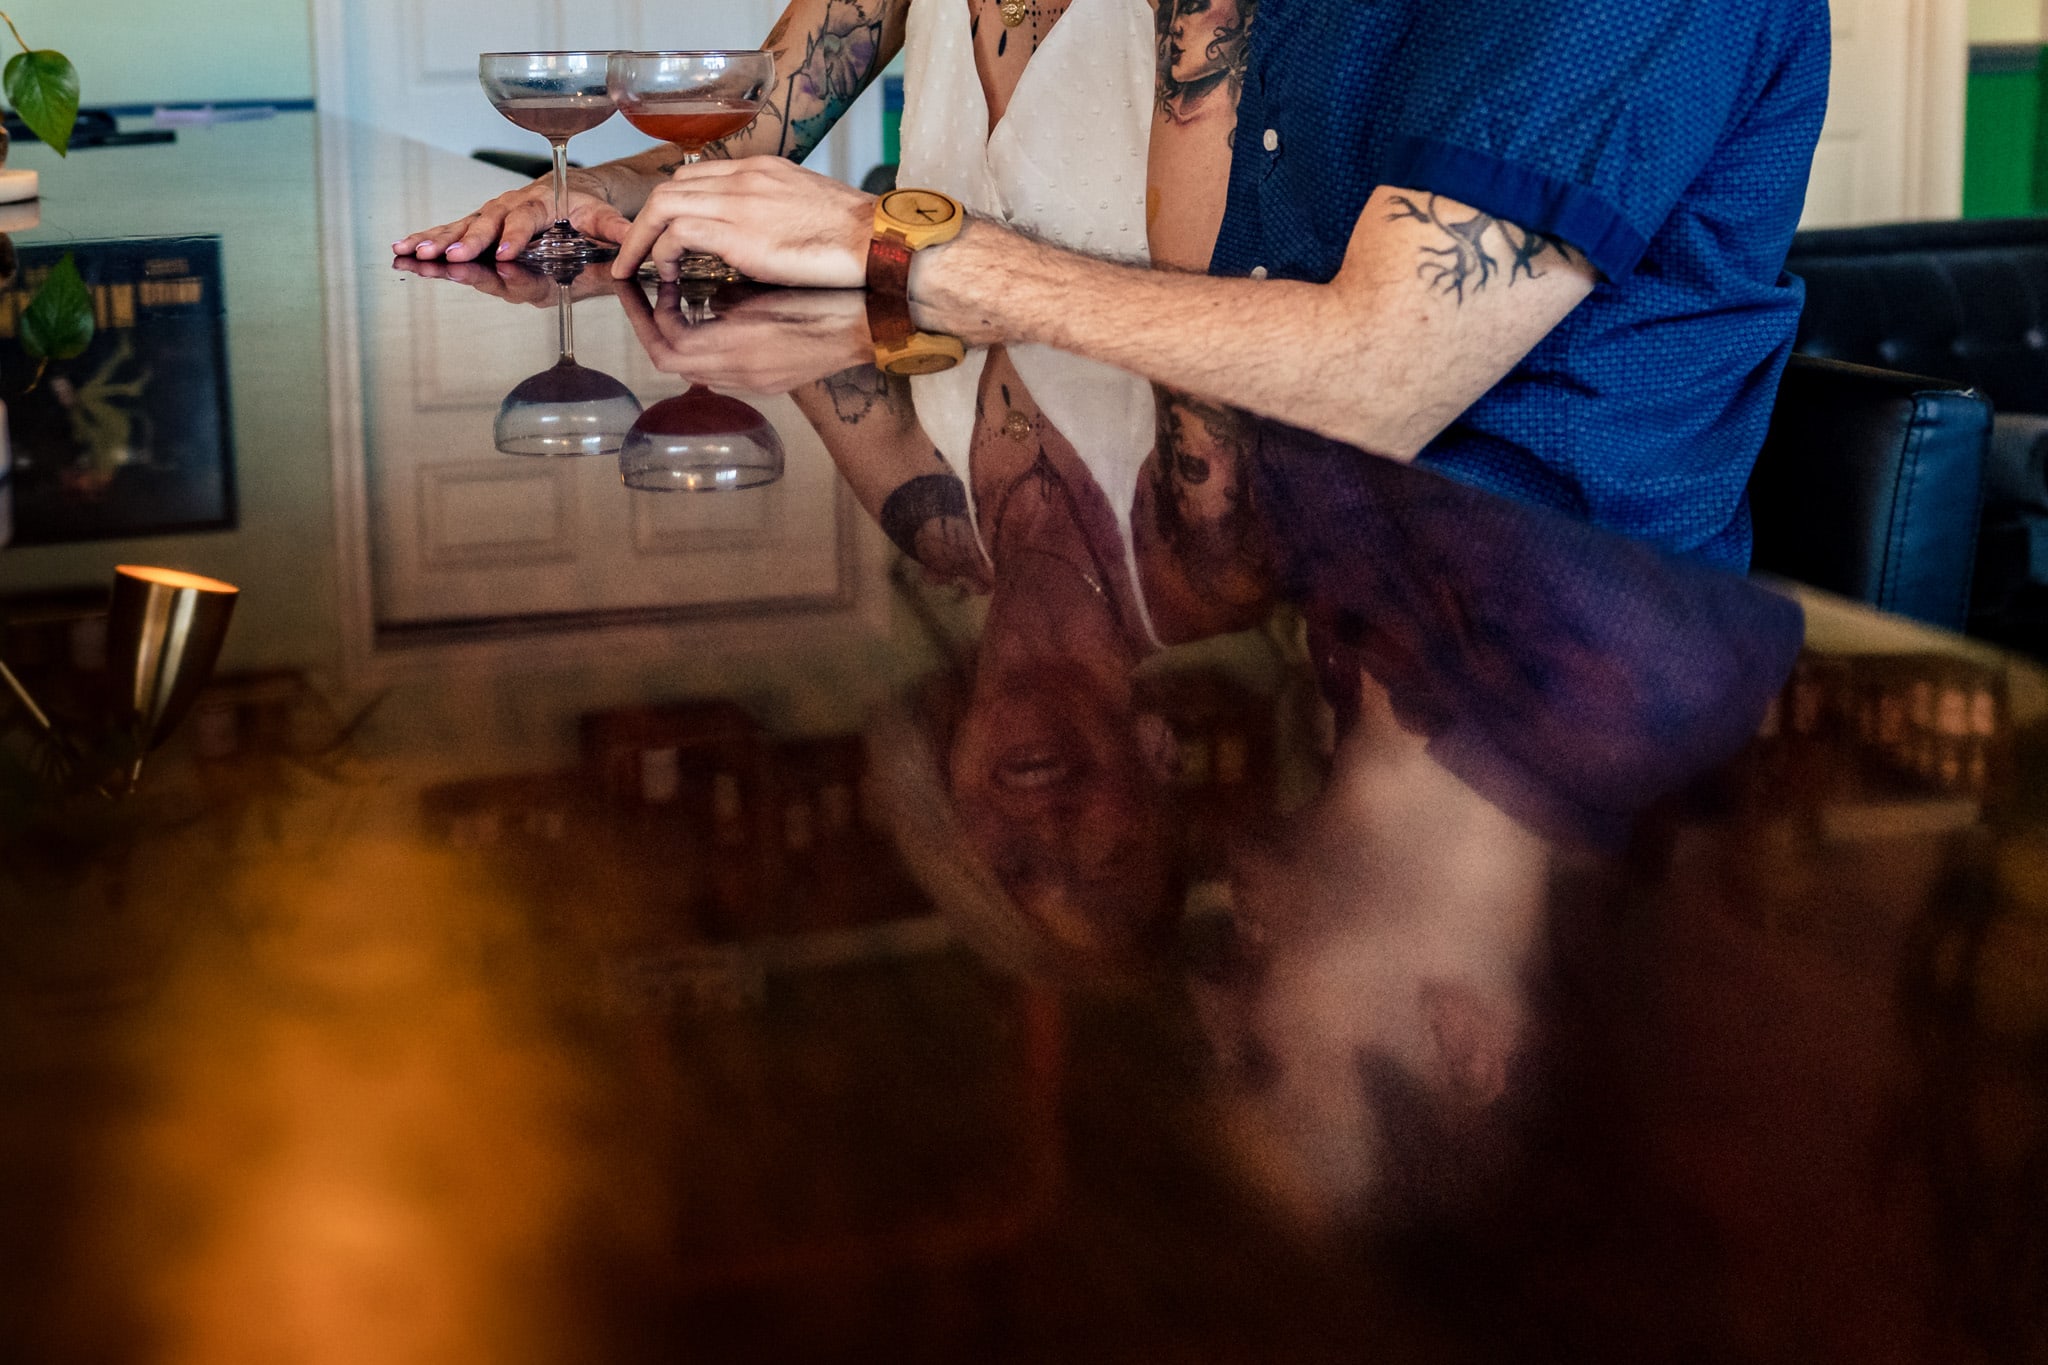 Aunt Bettys Speakeasy gin bar in downtown Raleigh was the perfect location for this engagement session | photos by Kivus & Camera